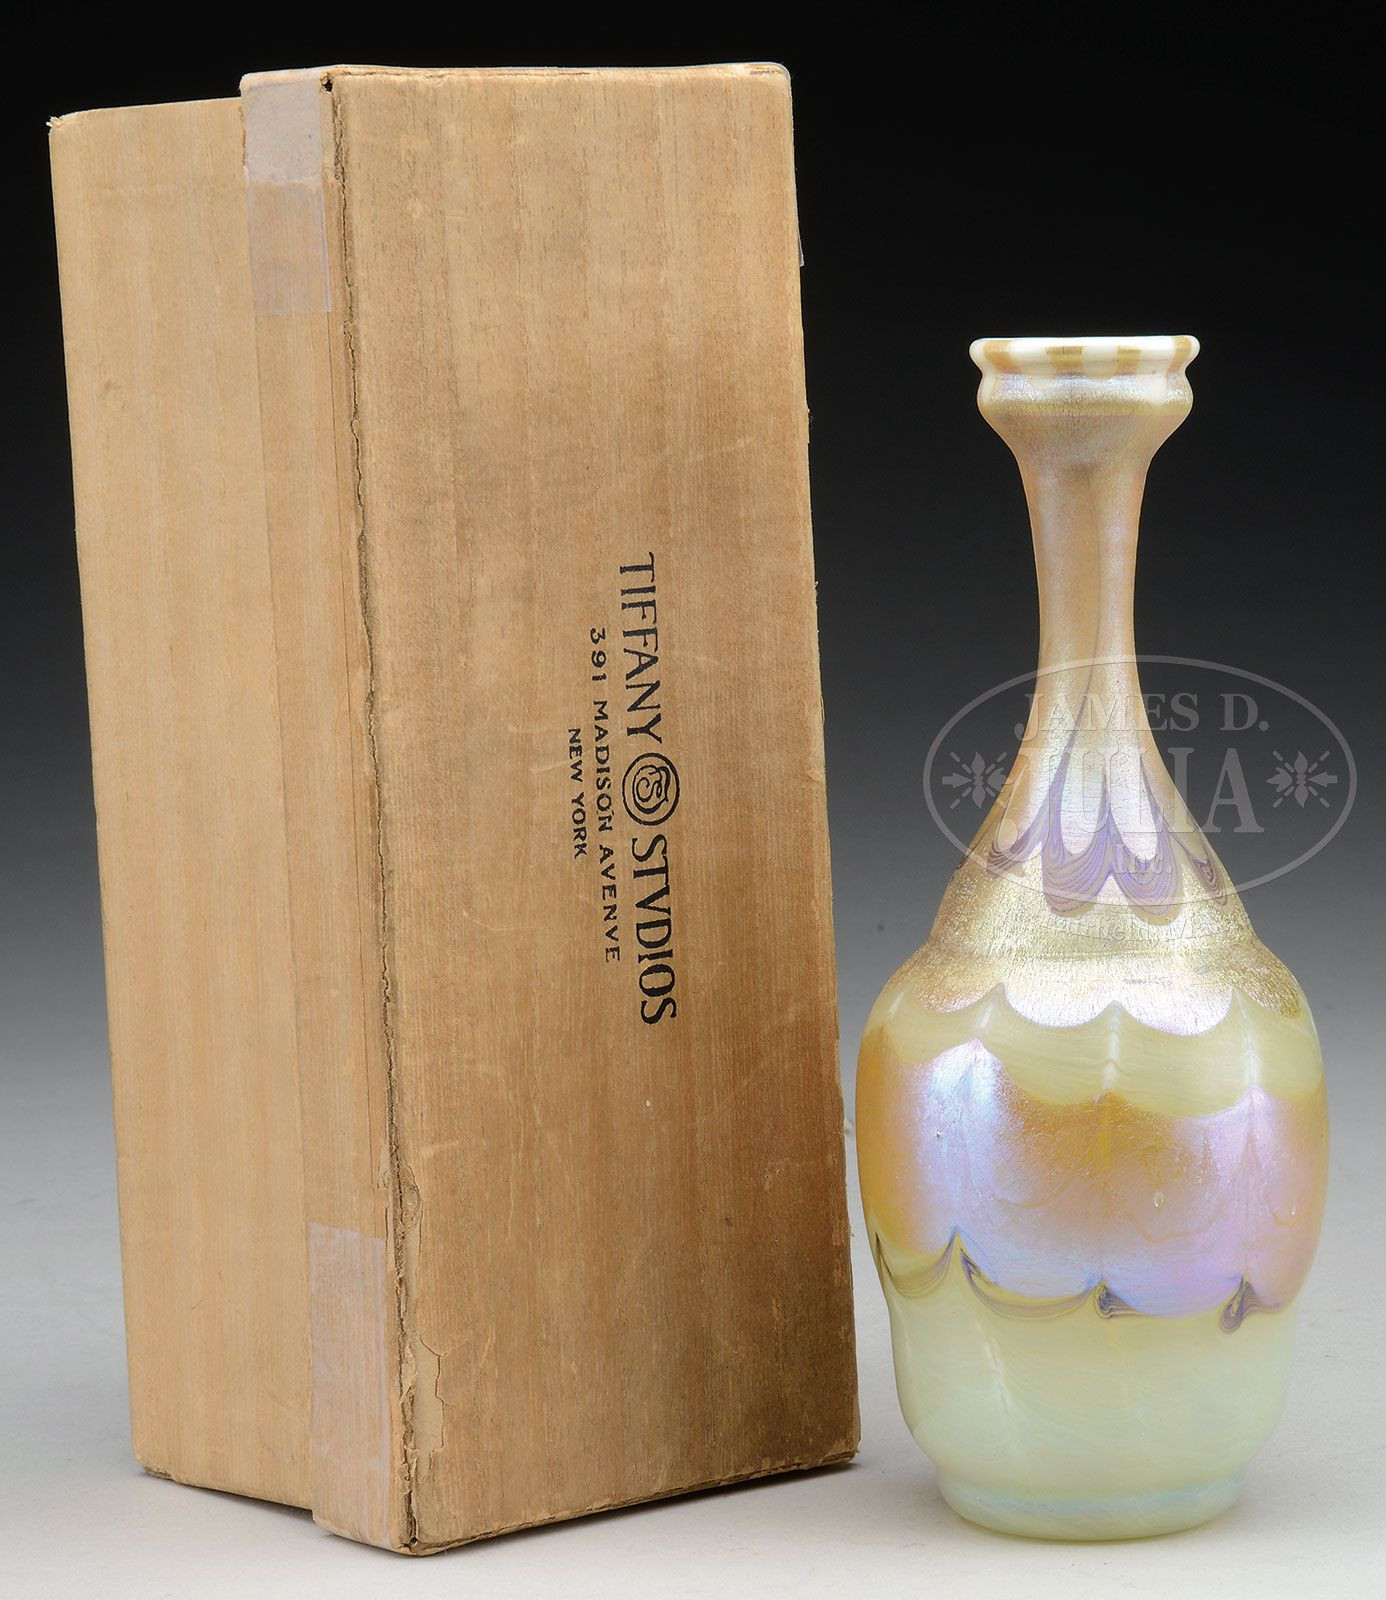 40 inch tall vases of tiffany favrile glass decorated vase tiffany favrile vase has in tiffany favrile glass decorated vase tiffany favrile vase has opaque cream colored glass body shading